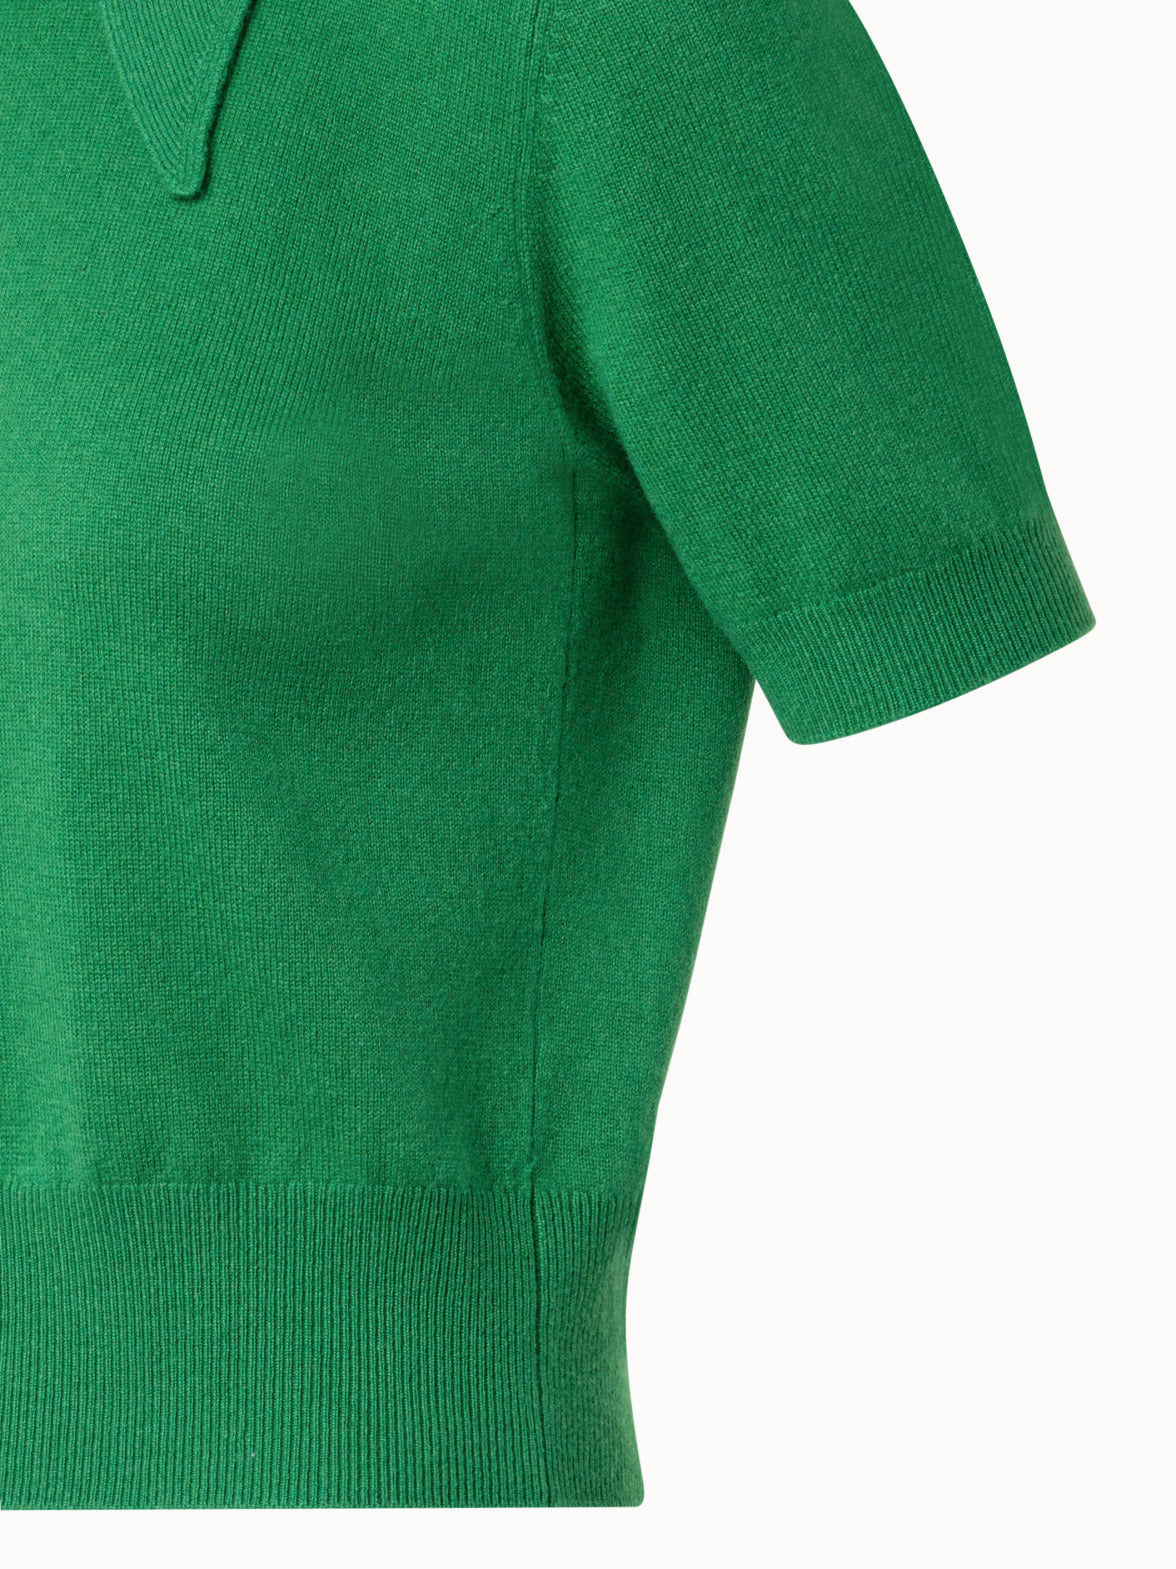 Cotton and Cashmere Mock Neck Elbow Patch Sweater in Green by Viyella Small